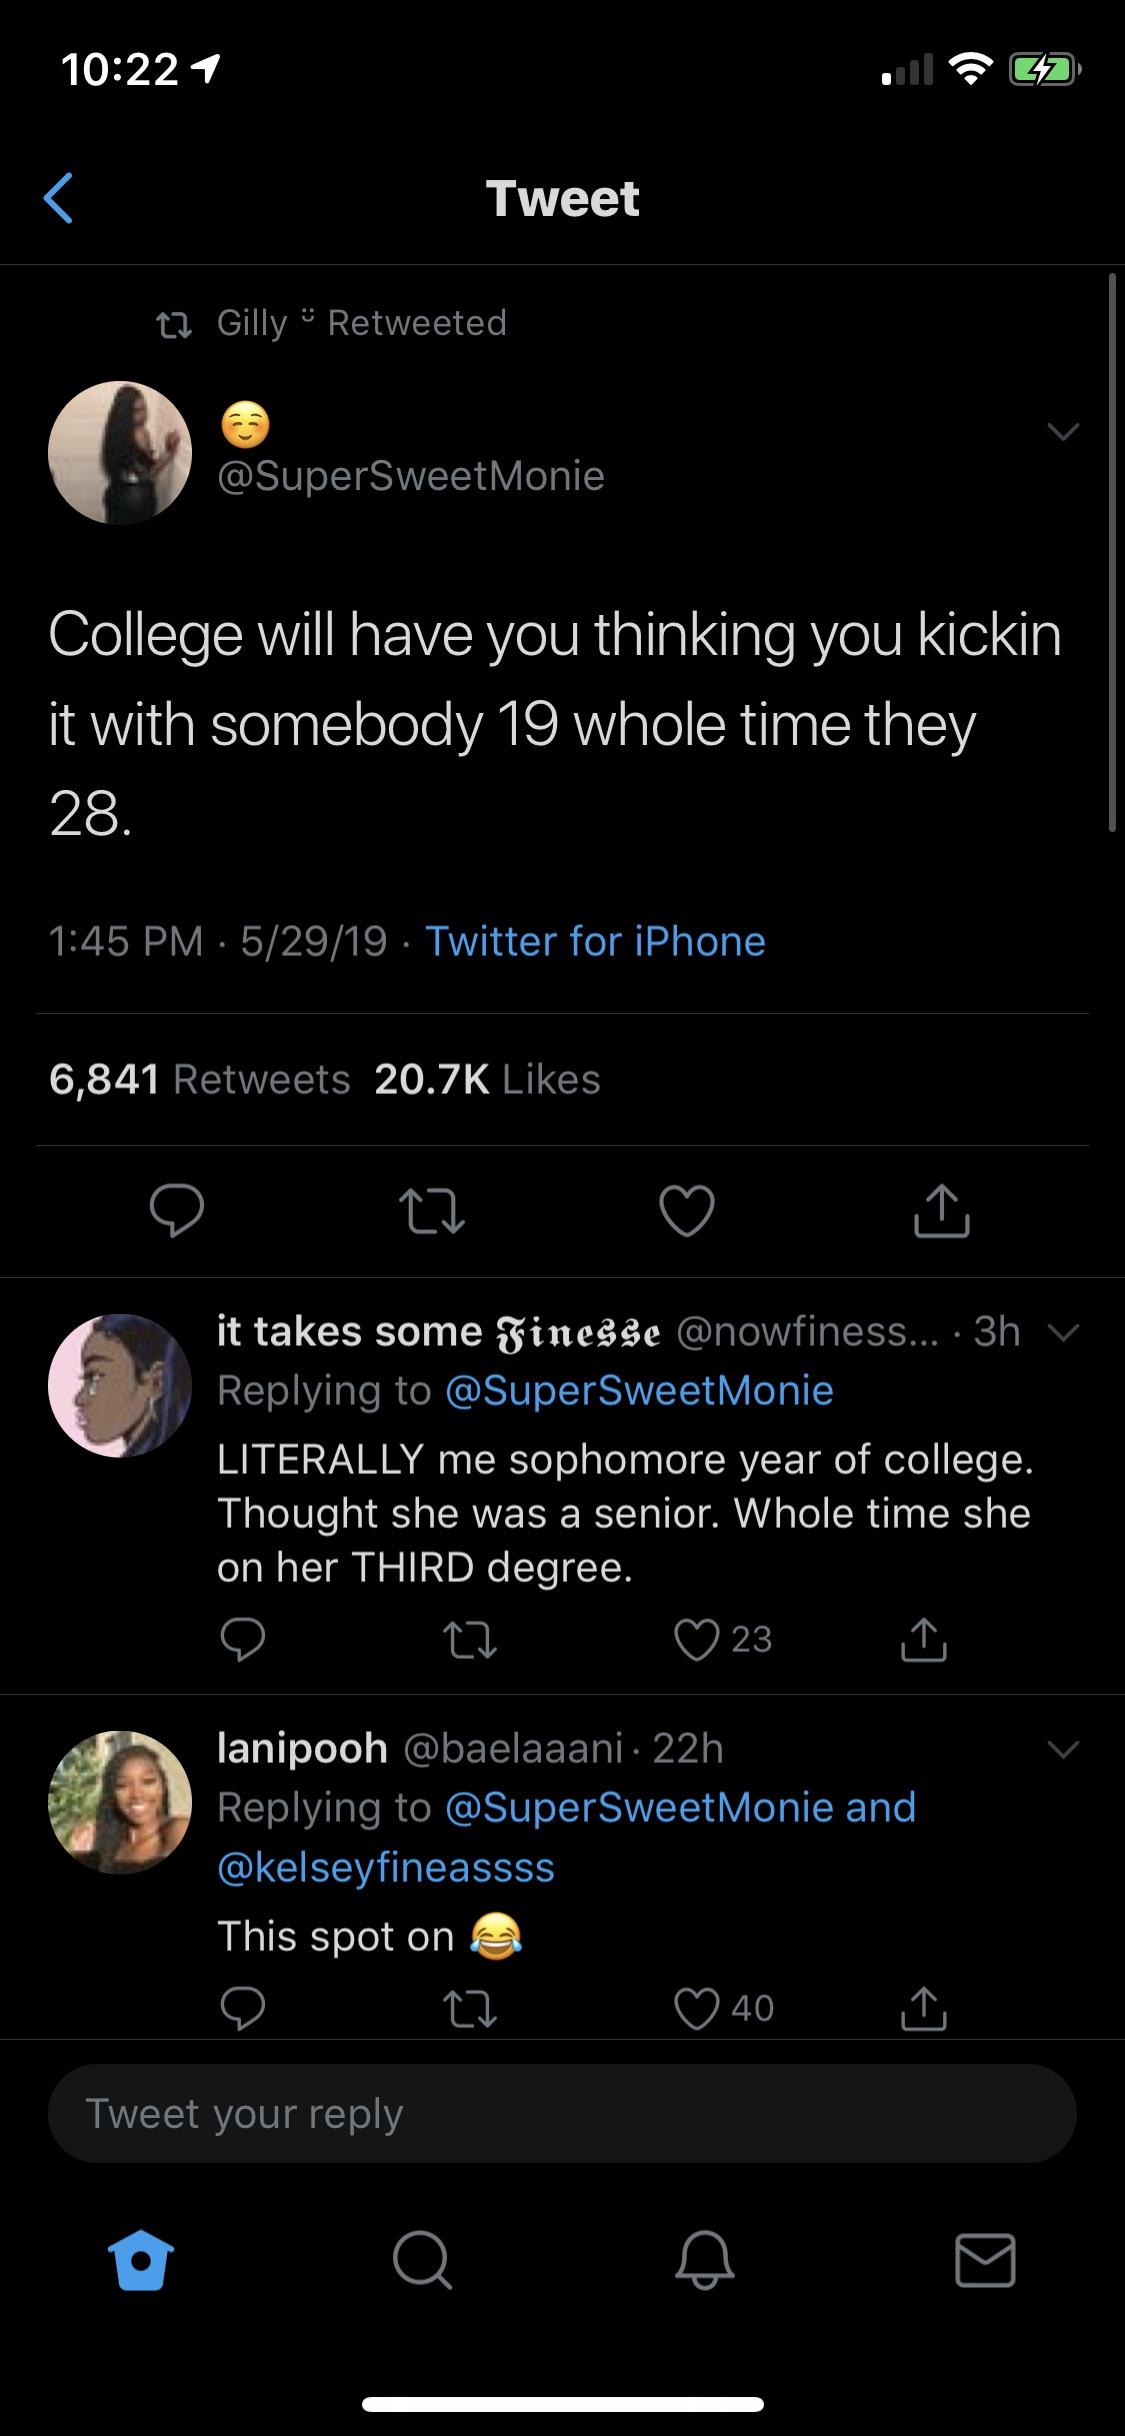 screenshot - Tweet 22 Gilly Retweeted College will have you thinking you kickin it with somebody 19 whole time they 28. . 52919 Twitter for iPhone 6,841 o 27 o 1 it takes some Finesse .... 3h v Literally me sophomore year of college Thought she was a seni